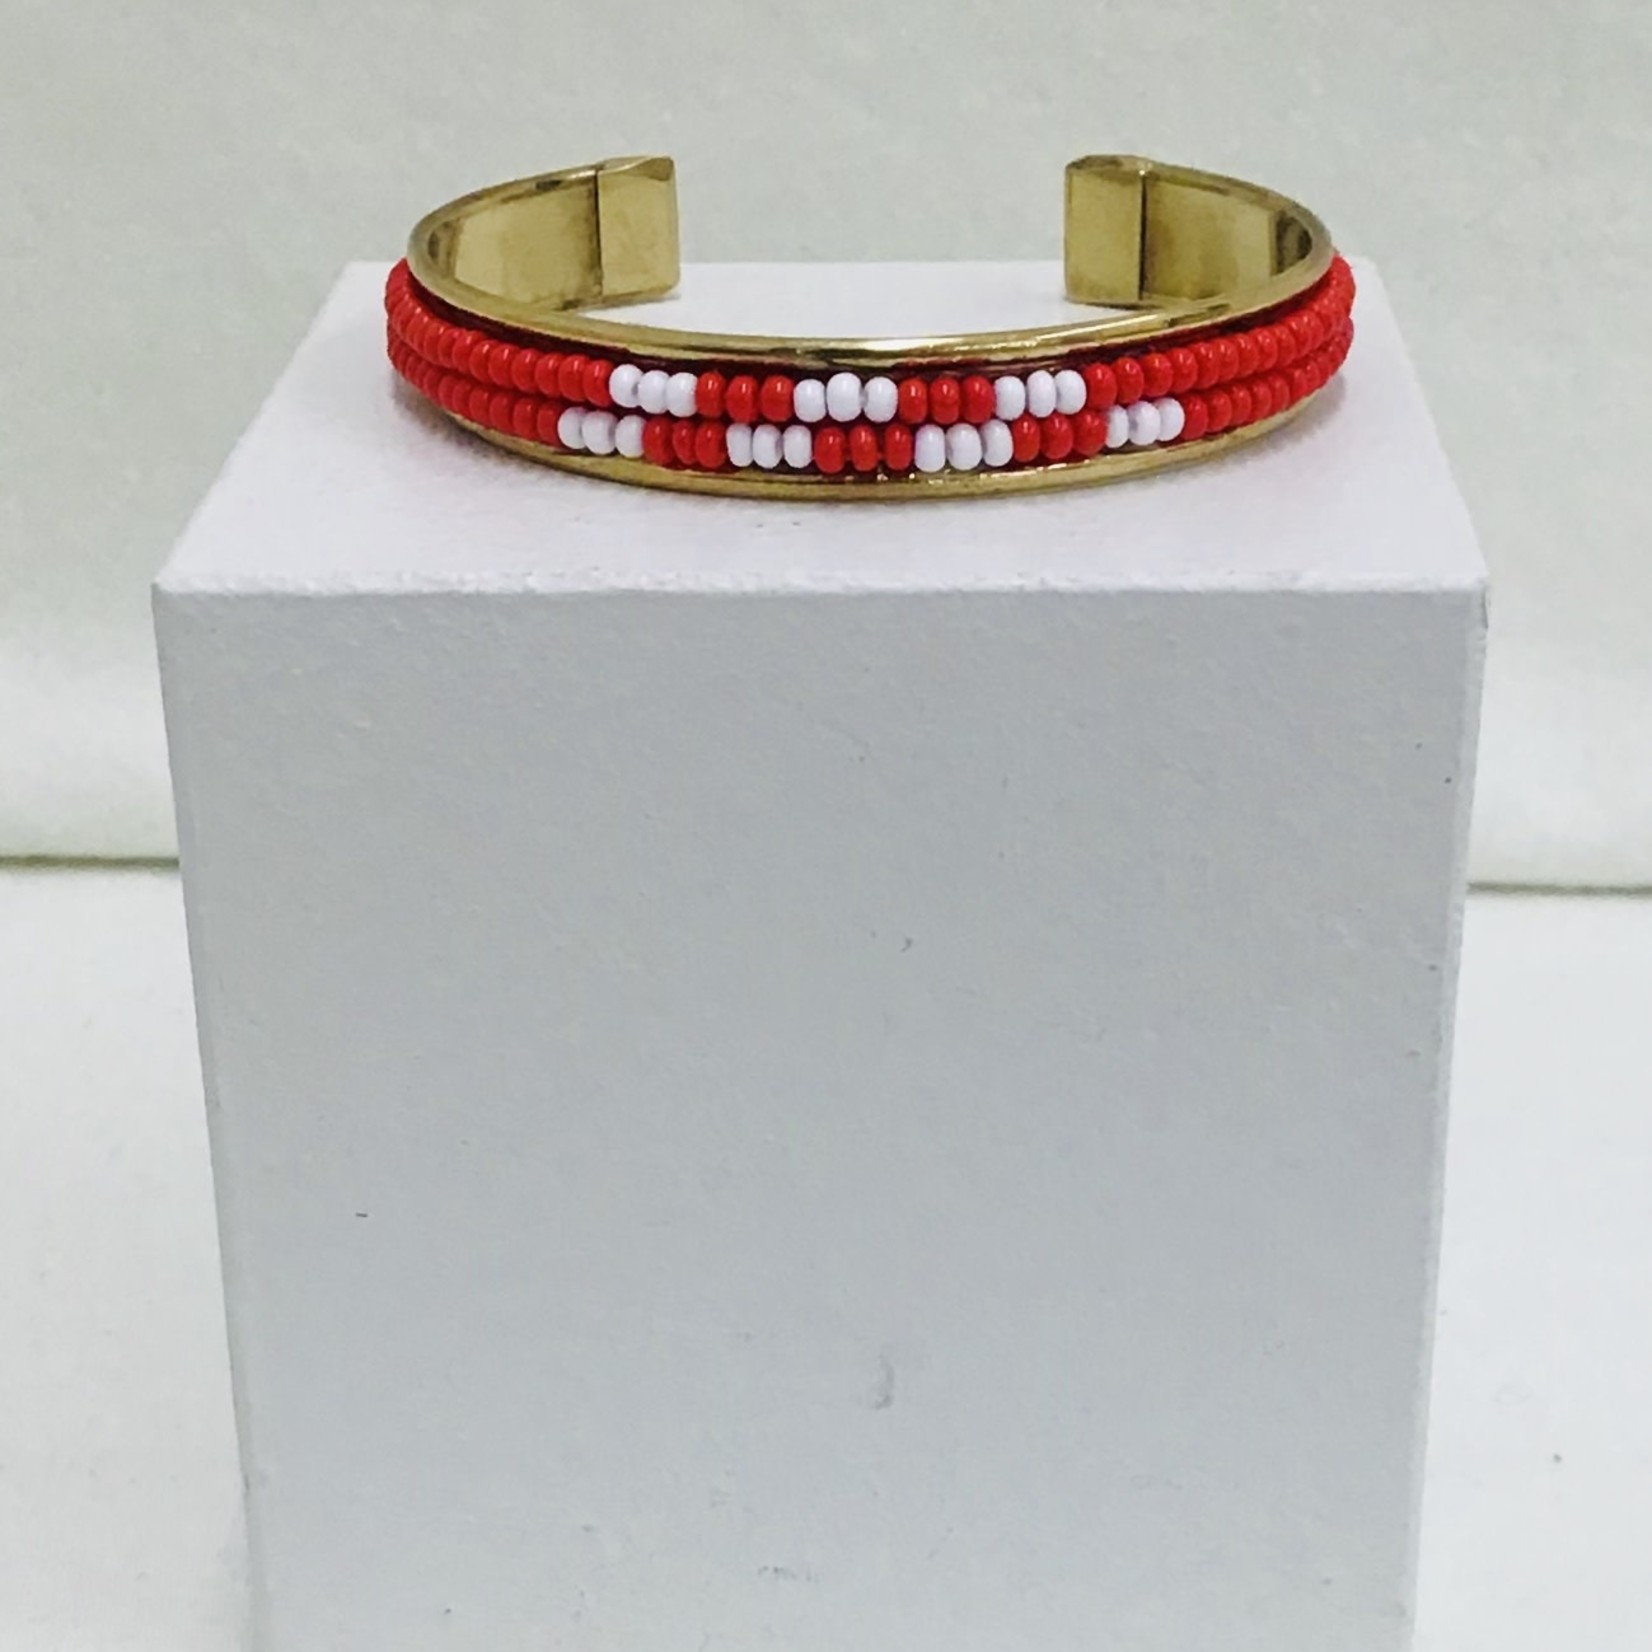 Ten Thousand Villages Red & White Beaded Cuff